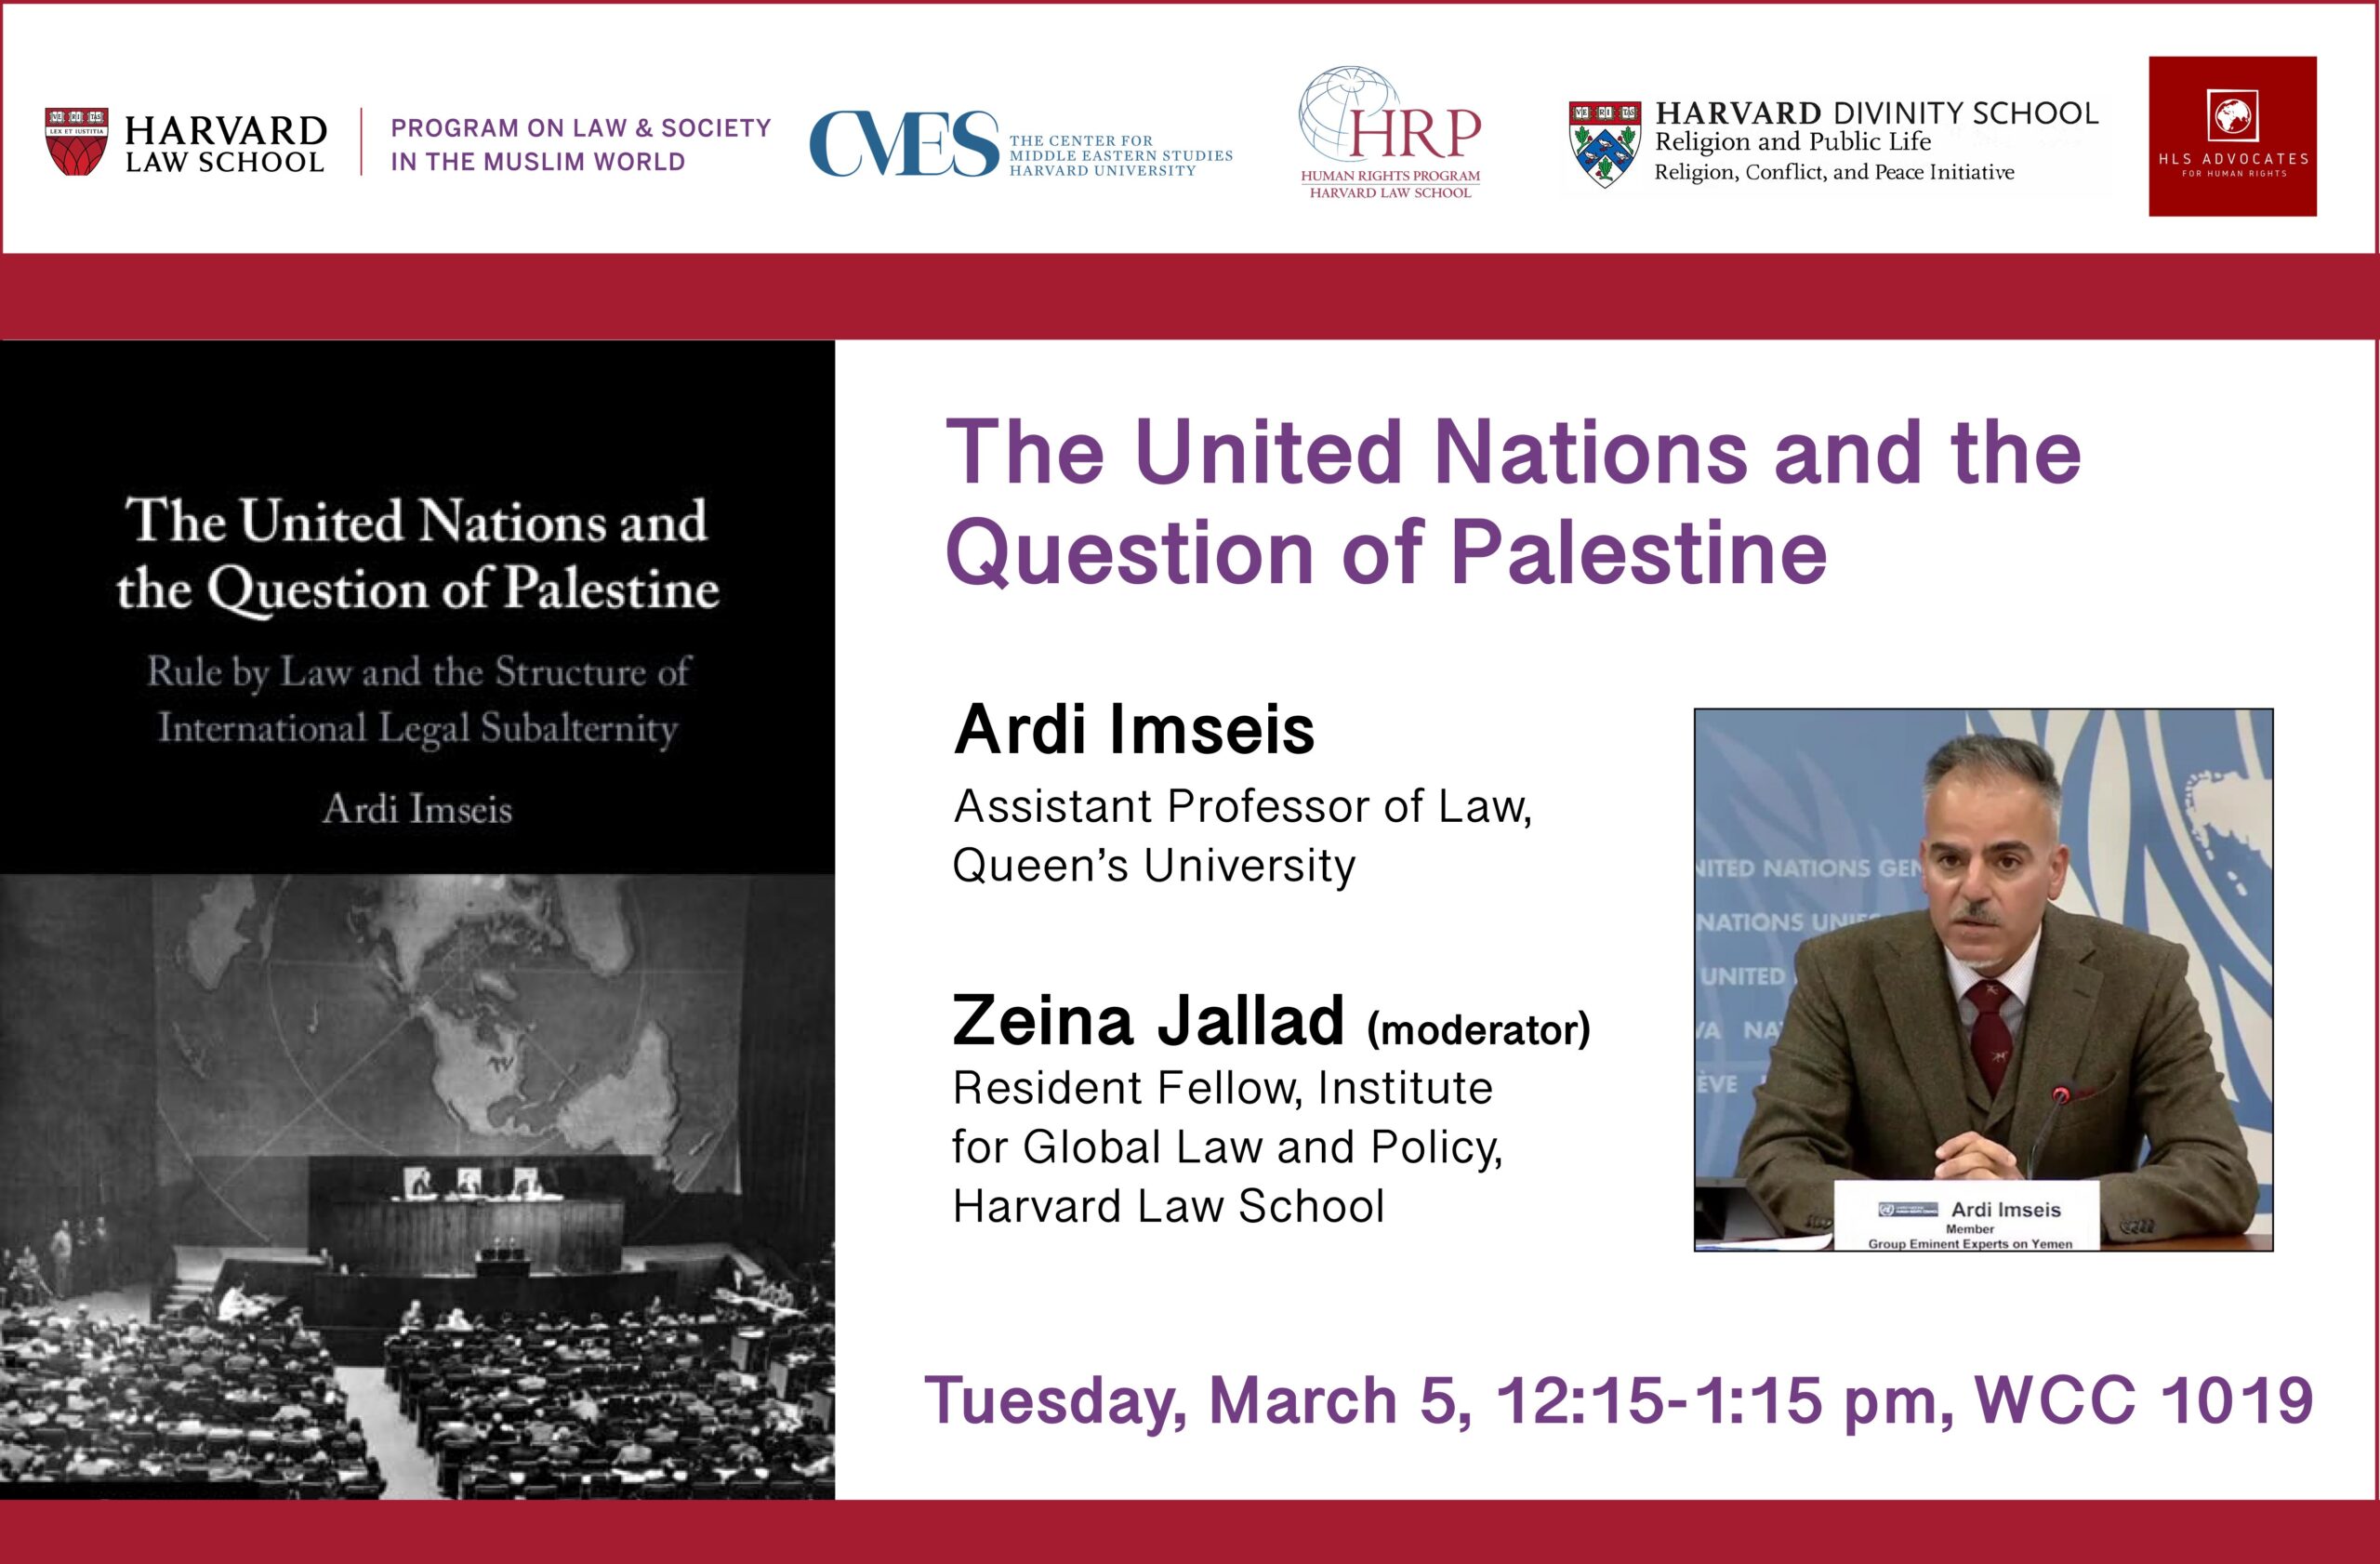 Banner of book talk "The United Nations and the Question of Palestine" on March 5 at 12:15 pm in WCC 1019. With author Ardi Imseis and moderator Zeina Jallad.